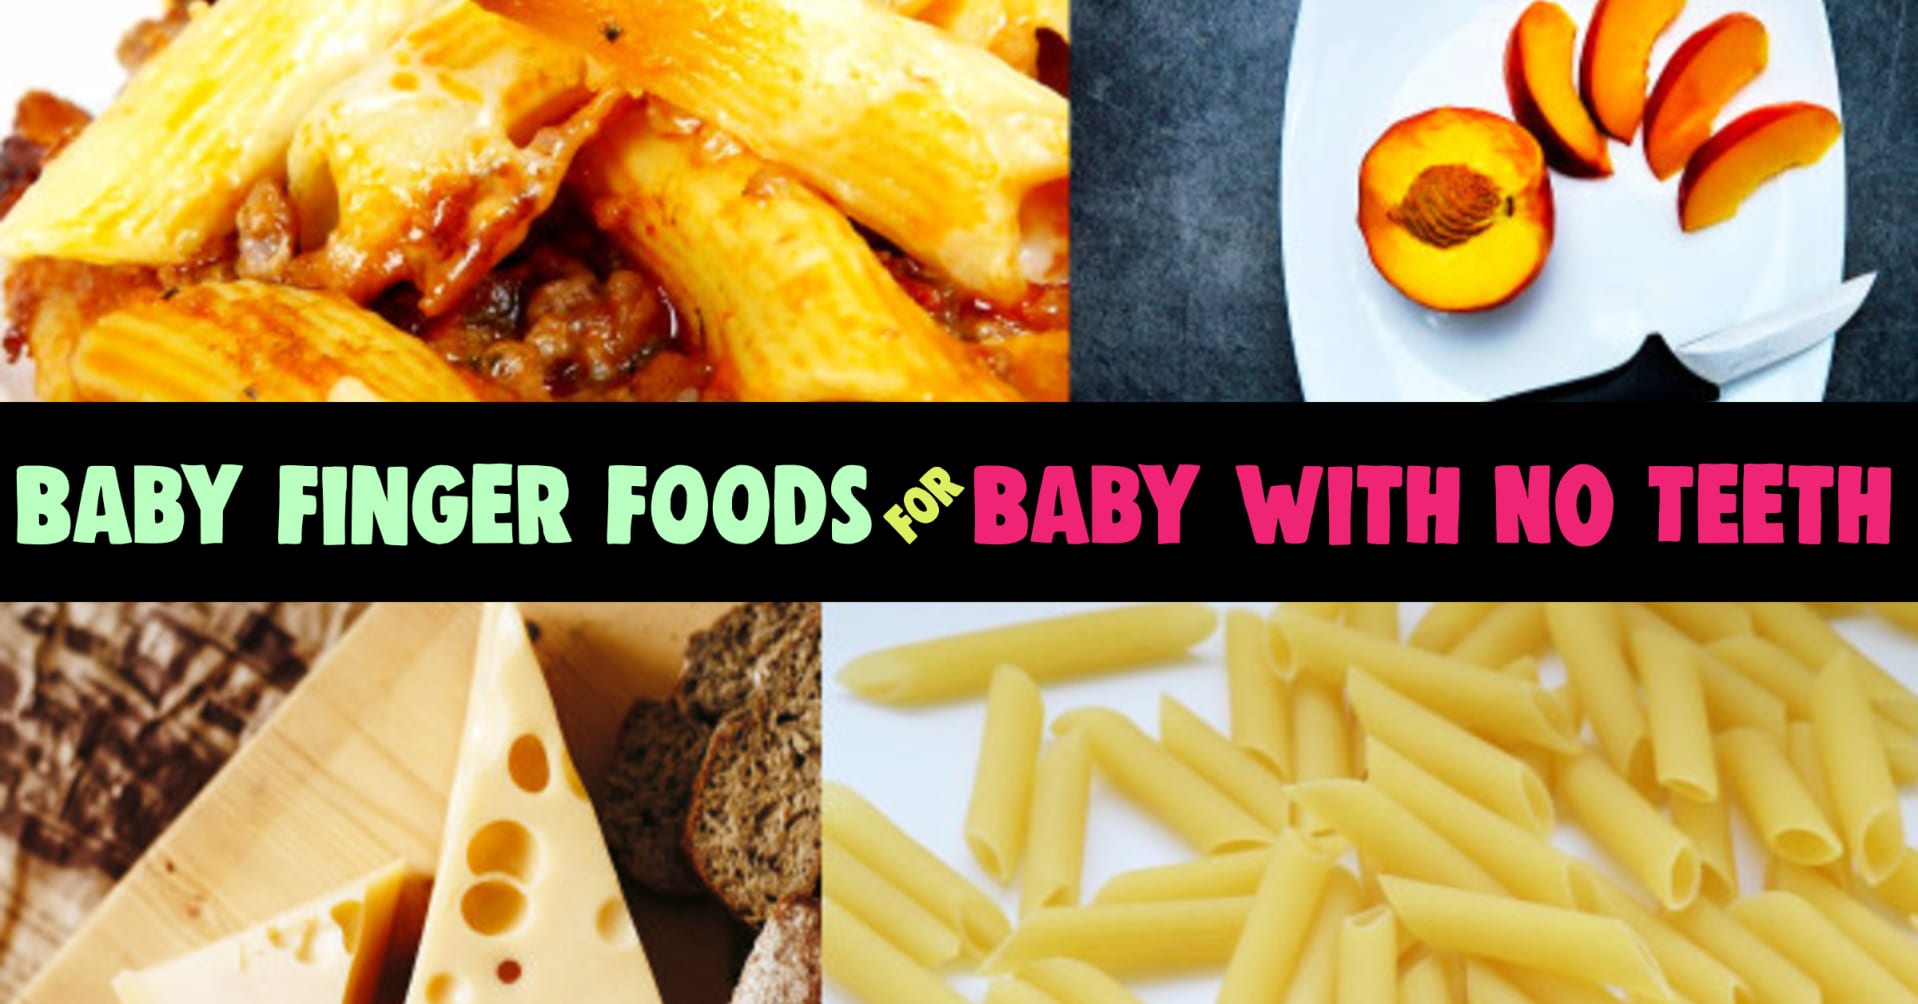 Baby Finger Foods!  Finger foods for baby with no teeth - 11 month old baby food list and 10 month old baby food recipes.  Baby finger foods 10 months, 7 months, 6 months or for any baby without teeth yet to chew. Easy baby meals and finger foods!